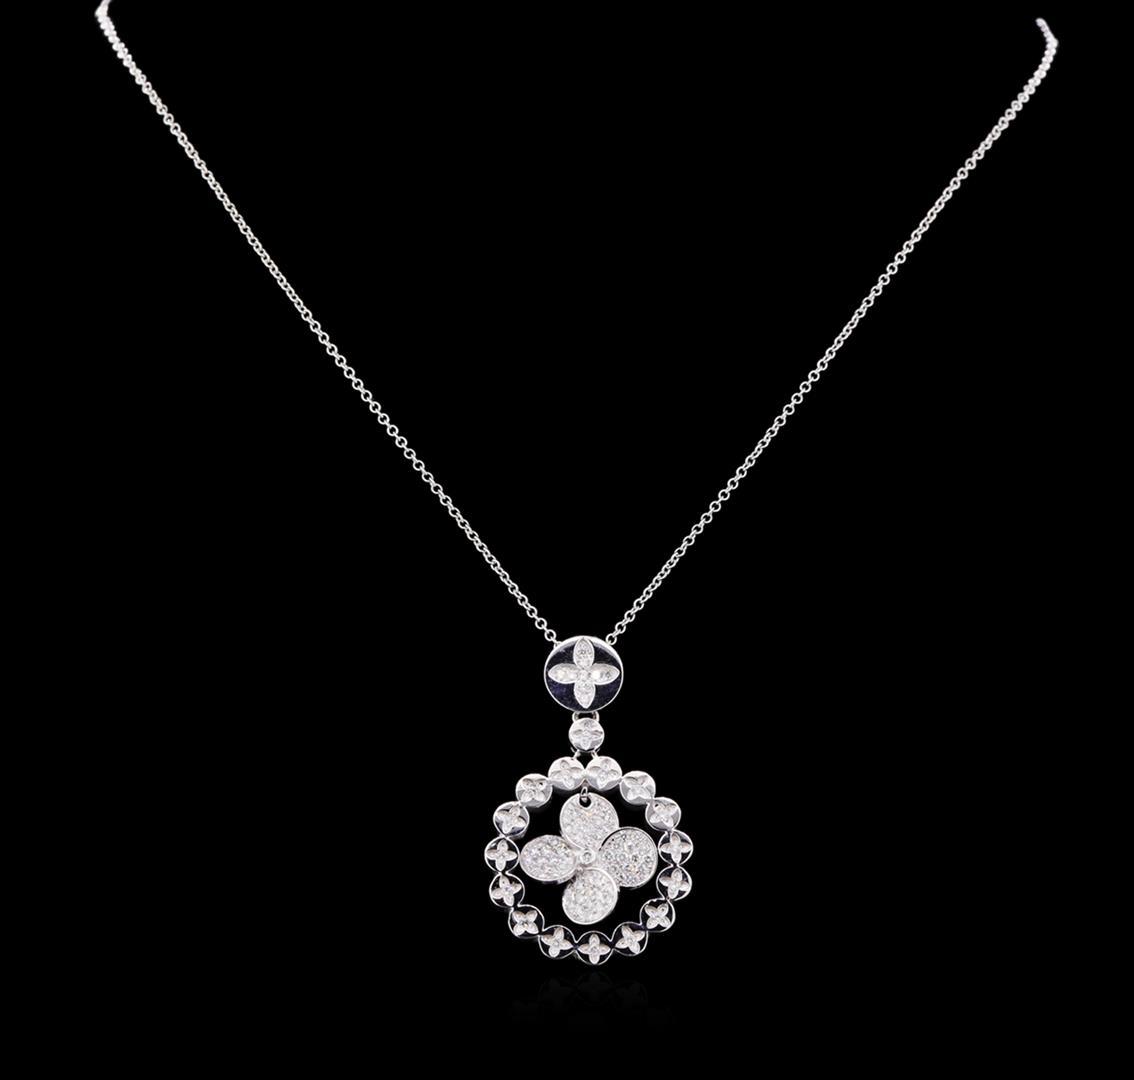 1.20 ctw Diamond Pendant With Chain - 14KT White Gold